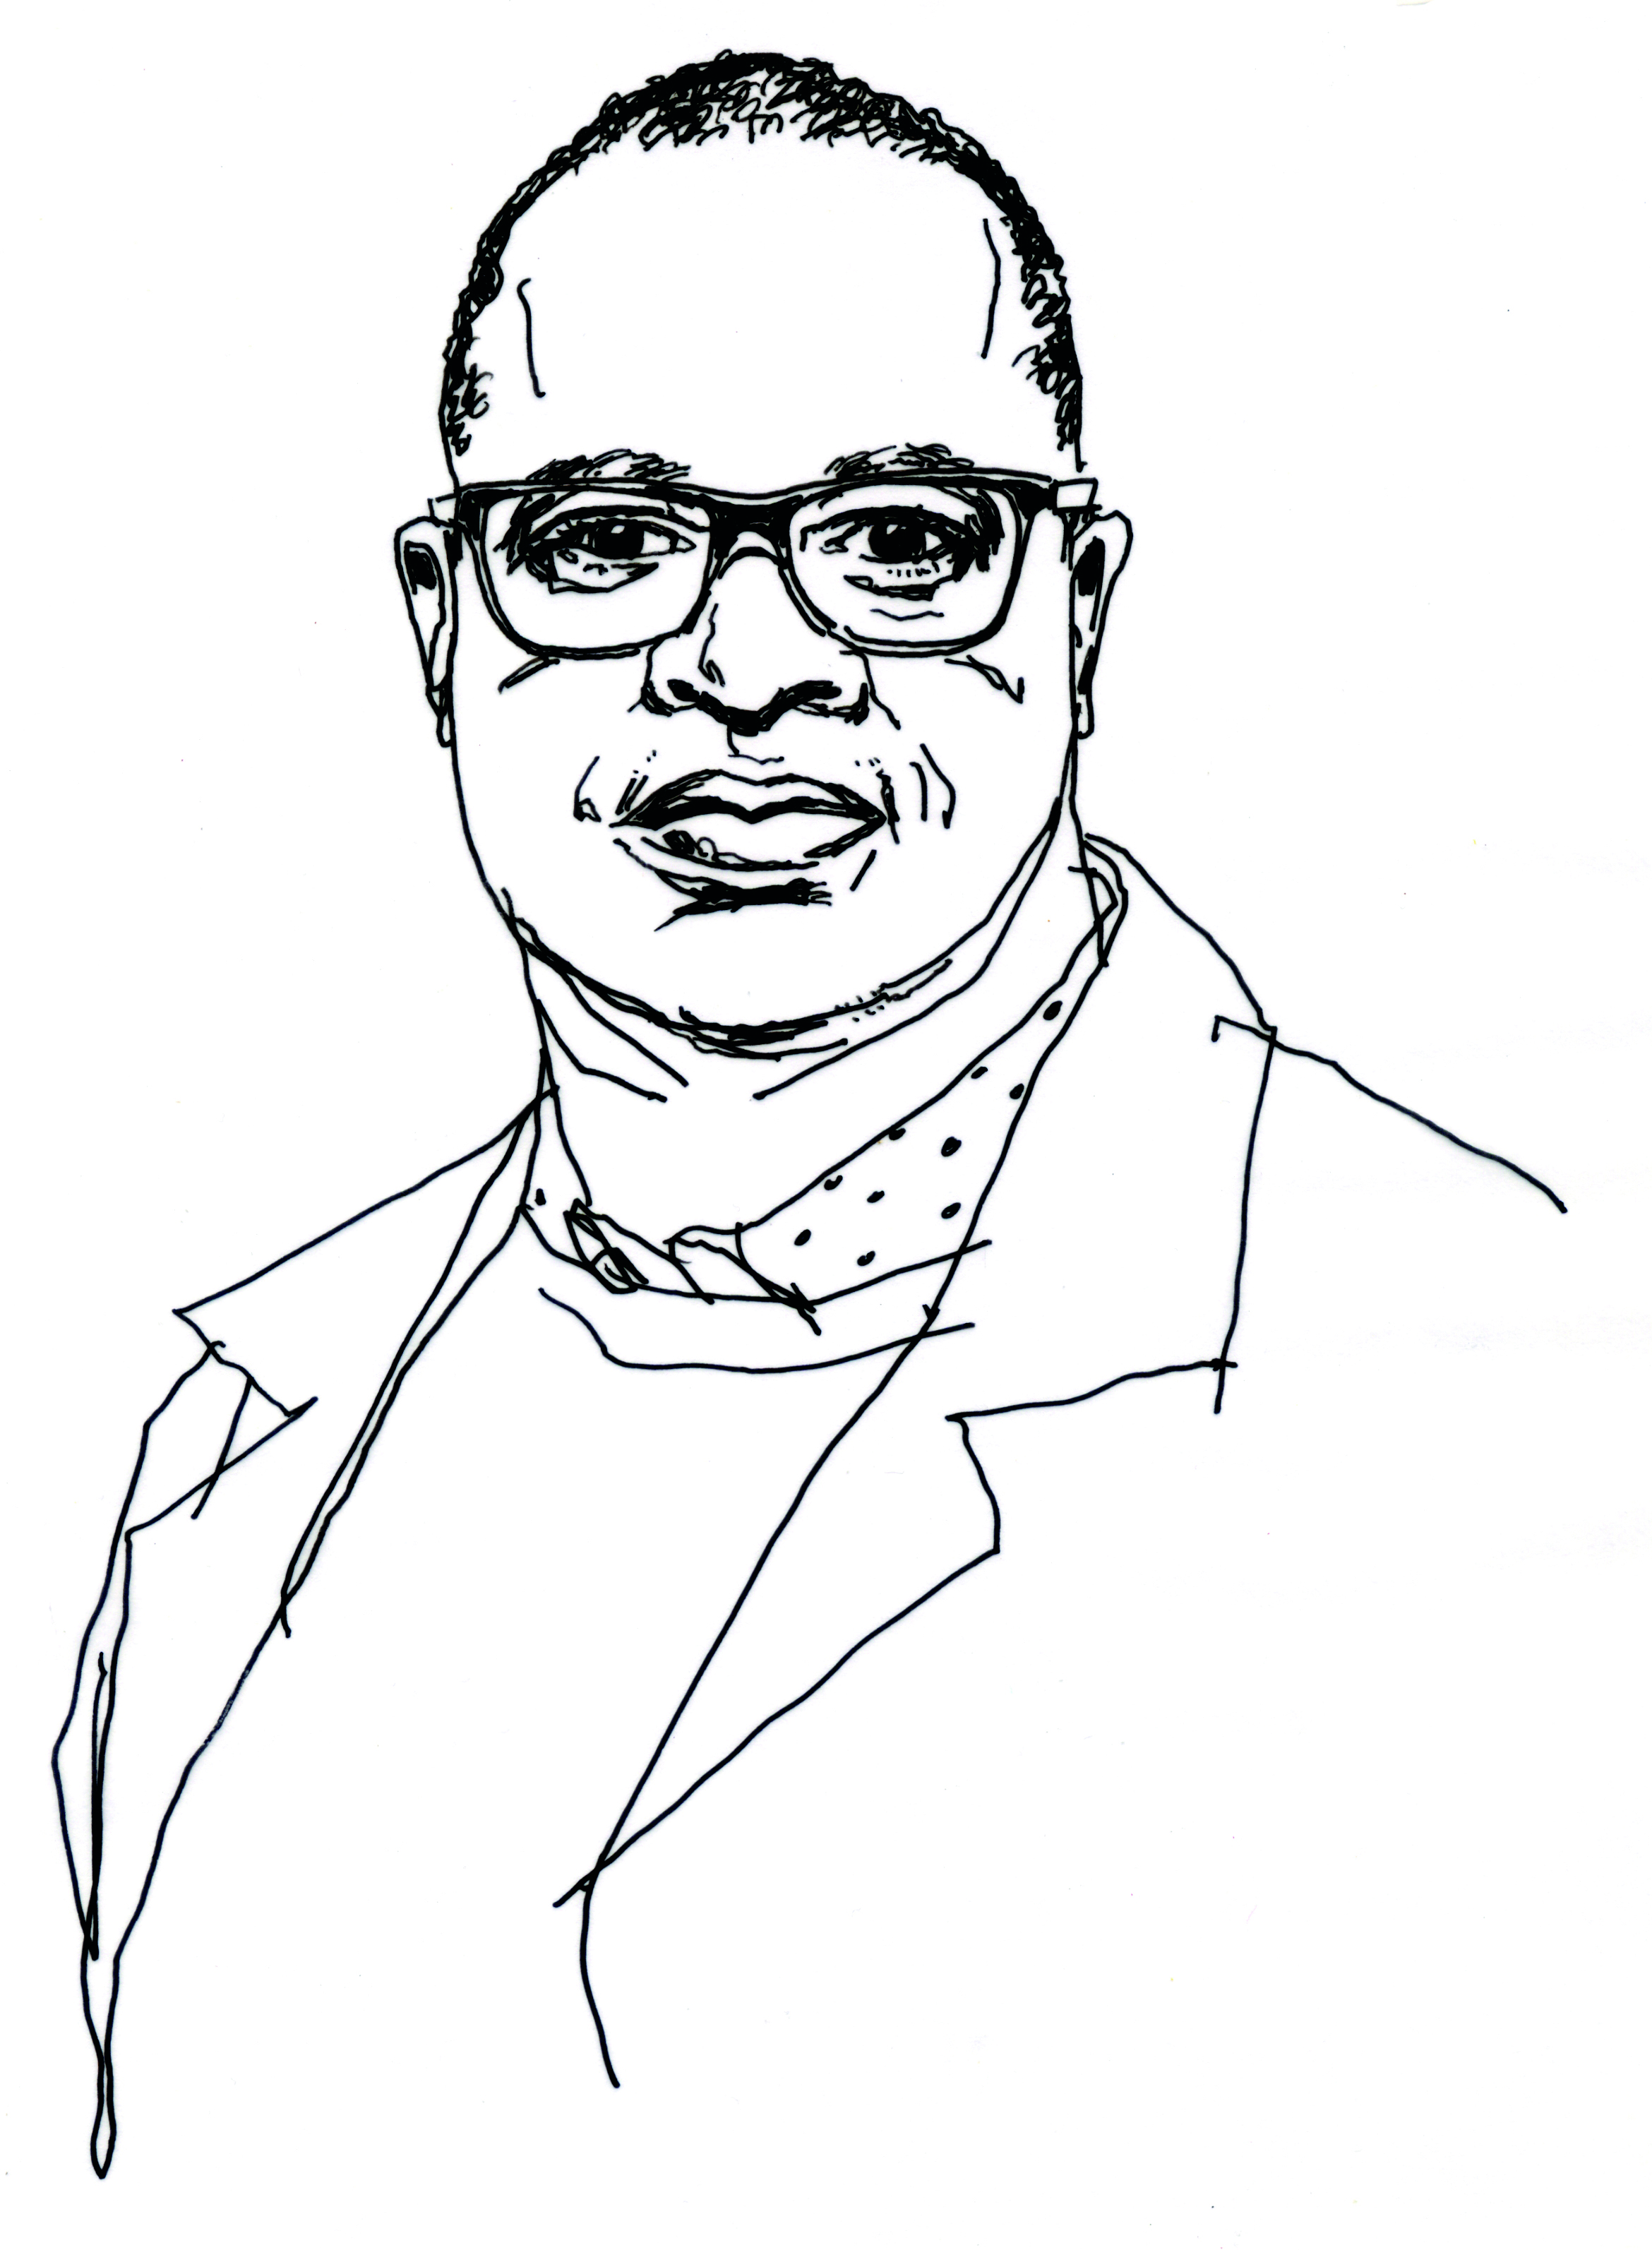 Illustration in black ink of middle-aged Black man in glasses, short hair and neutral expression.